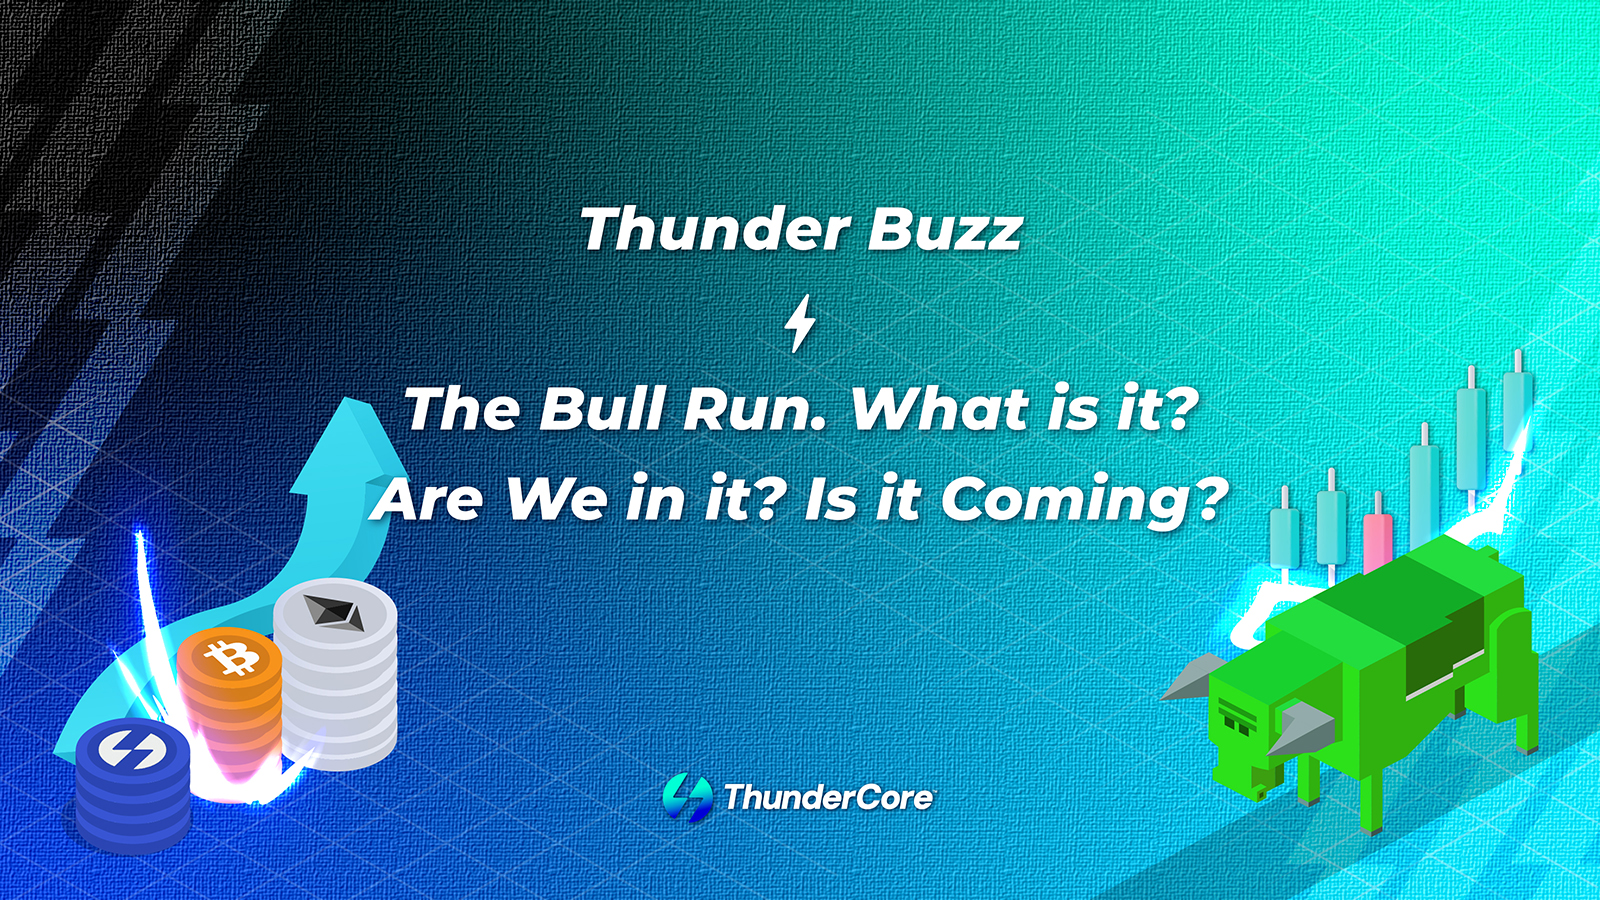 Thunder Buzz: The Bull Run. What is it? Are We in it? Is it Coming?